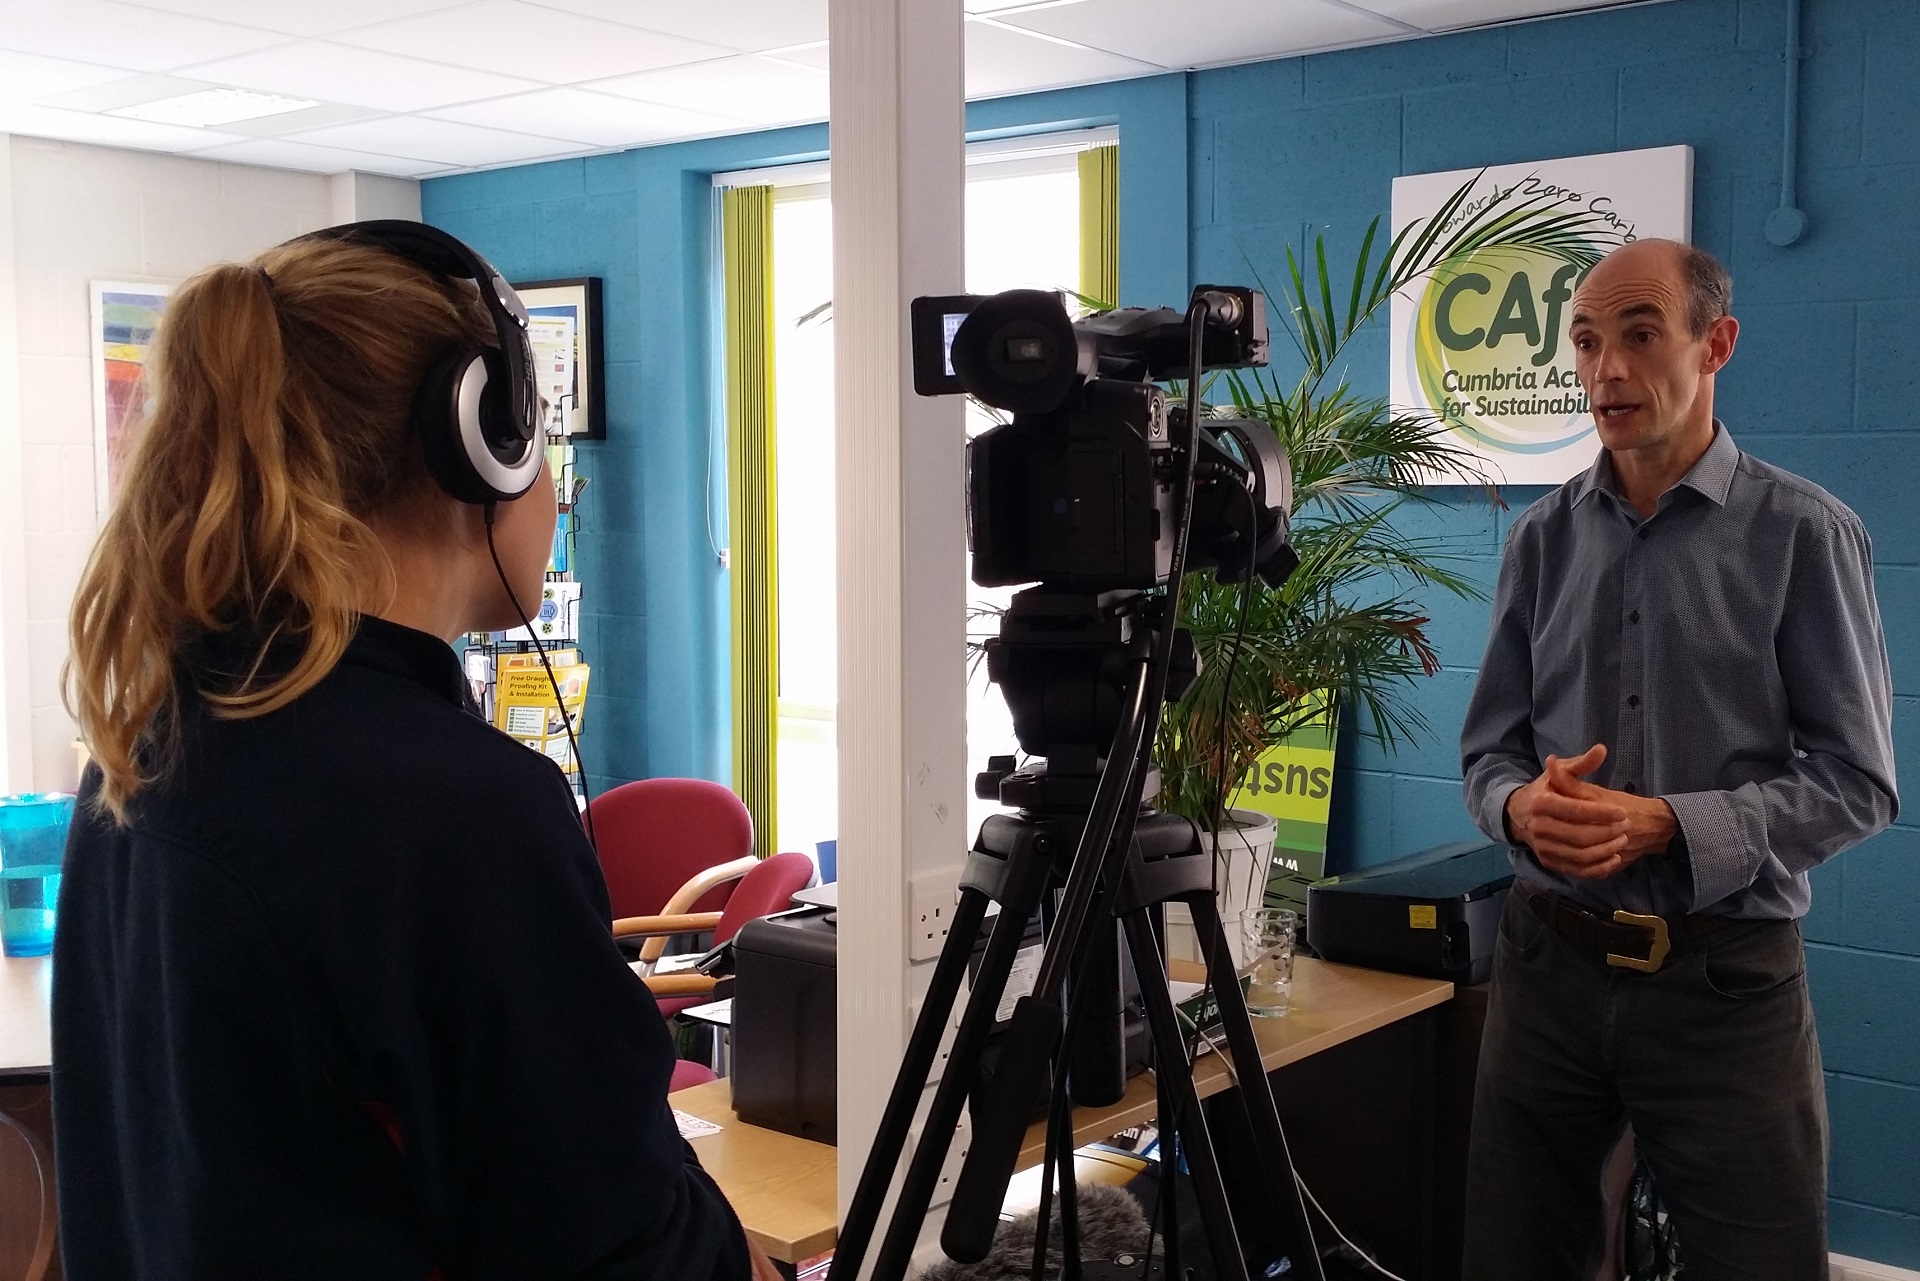 Phil Davies from CAfS being interviewed by a TV news journalist